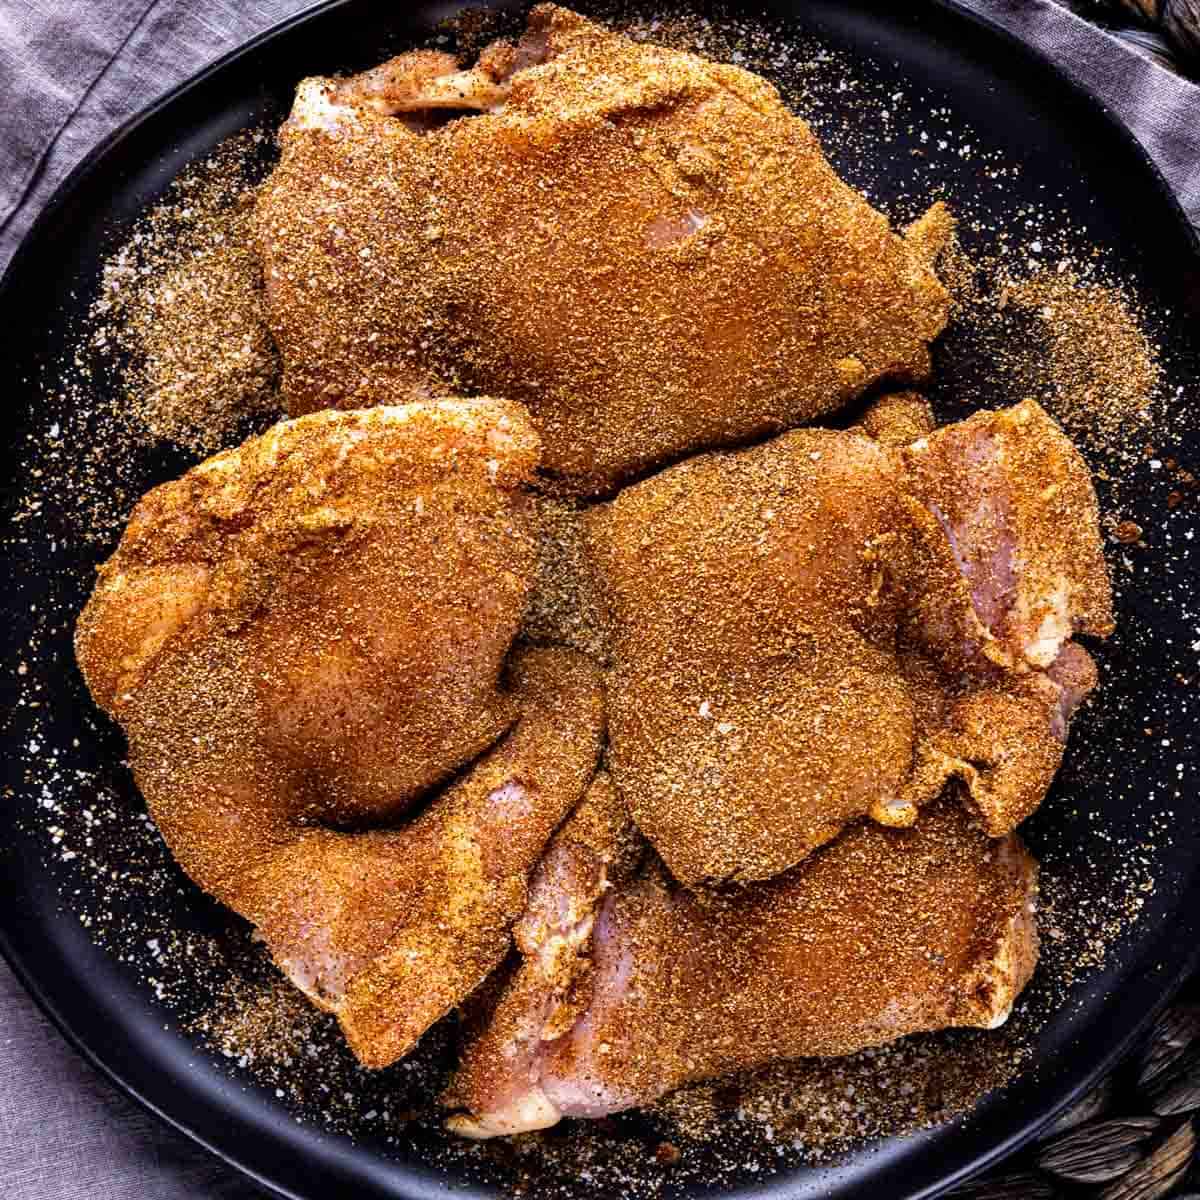 Raw chicken thighs coated with dry rub seasoning on a black plate for One Pot Mexican Chicken and Rice